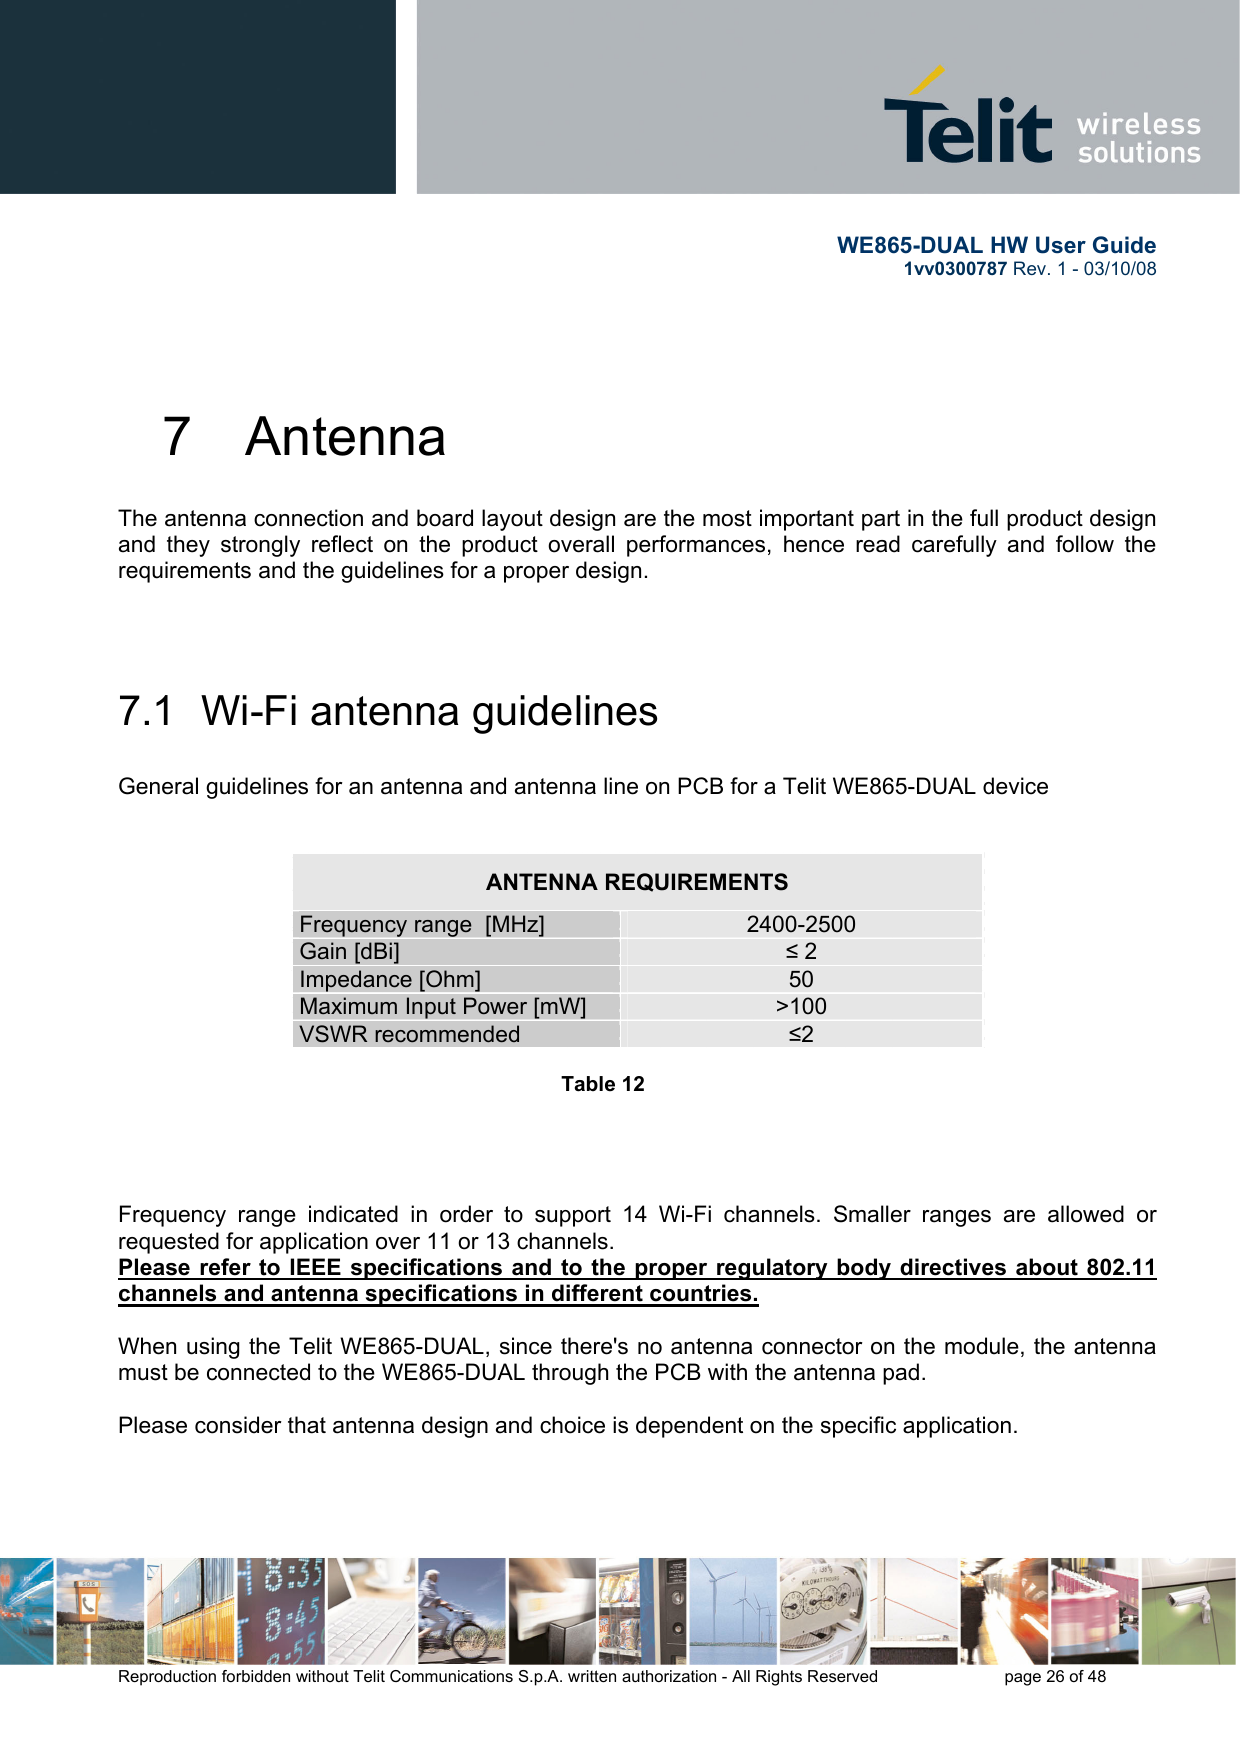       WE865-DUAL HW User Guide 1vv0300787 Rev. 1 - 03/10/08      Reproduction forbidden without Telit Communications S.p.A. written authorization - All Rights Reserved    page 26 of 48  7  Antenna The antenna connection and board layout design are the most important part in the full product design and they strongly reflect on the product overall performances, hence read carefully and follow the requirements and the guidelines for a proper design.   7.1  Wi-Fi antenna guidelines  General guidelines for an antenna and antenna line on PCB for a Telit WE865-DUAL device    ANTENNA REQUIREMENTS Frequency range  [MHz]  2400-2500 Gain [dBi]  ≤ 2 Impedance [Ohm]  50 Maximum Input Power [mW]  &gt;100 VSWR recommended  ≤2  Table 12          Frequency range indicated in order to support 14 Wi-Fi channels. Smaller ranges are allowed or requested for application over 11 or 13 channels. Please refer to IEEE specifications and to the proper regulatory body directives about 802.11 channels and antenna specifications in different countries.  When using the Telit WE865-DUAL, since there&apos;s no antenna connector on the module, the antenna must be connected to the WE865-DUAL through the PCB with the antenna pad.  Please consider that antenna design and choice is dependent on the specific application.    